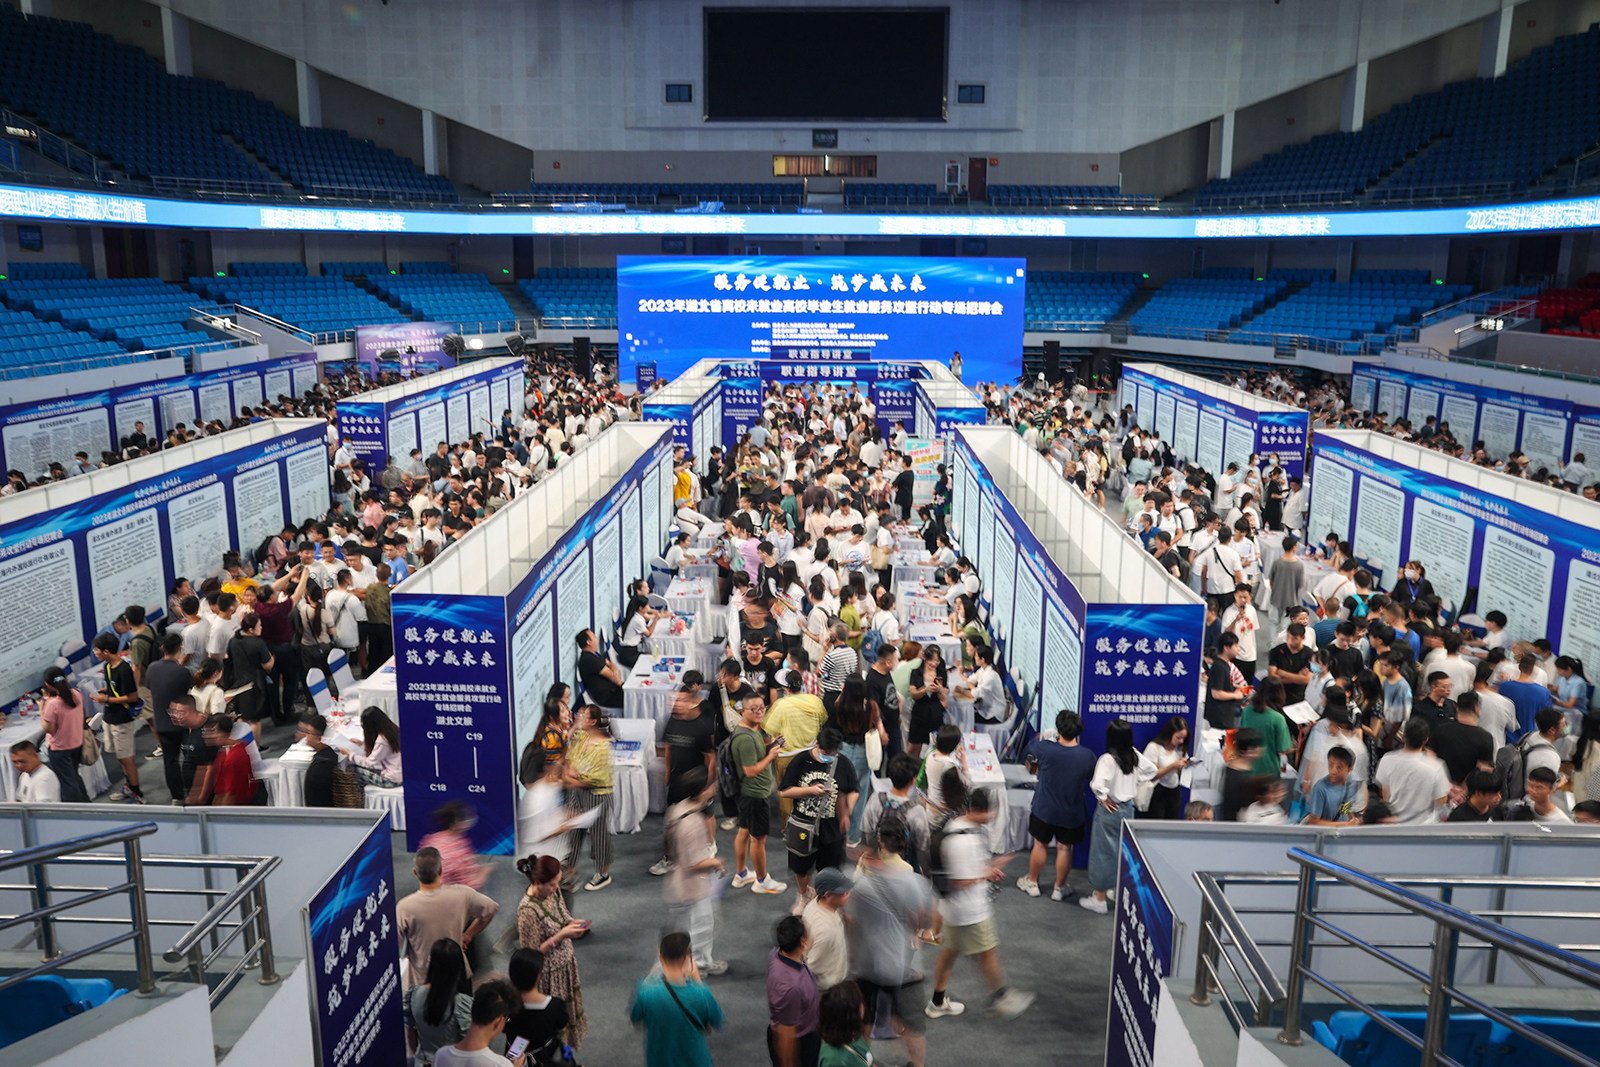 The average monthly salary expectation of this year’s college graduates in China is 8,033 yuan (US$1,100) – or 100 yuan less than last year, according to new findings. Photo: TNS